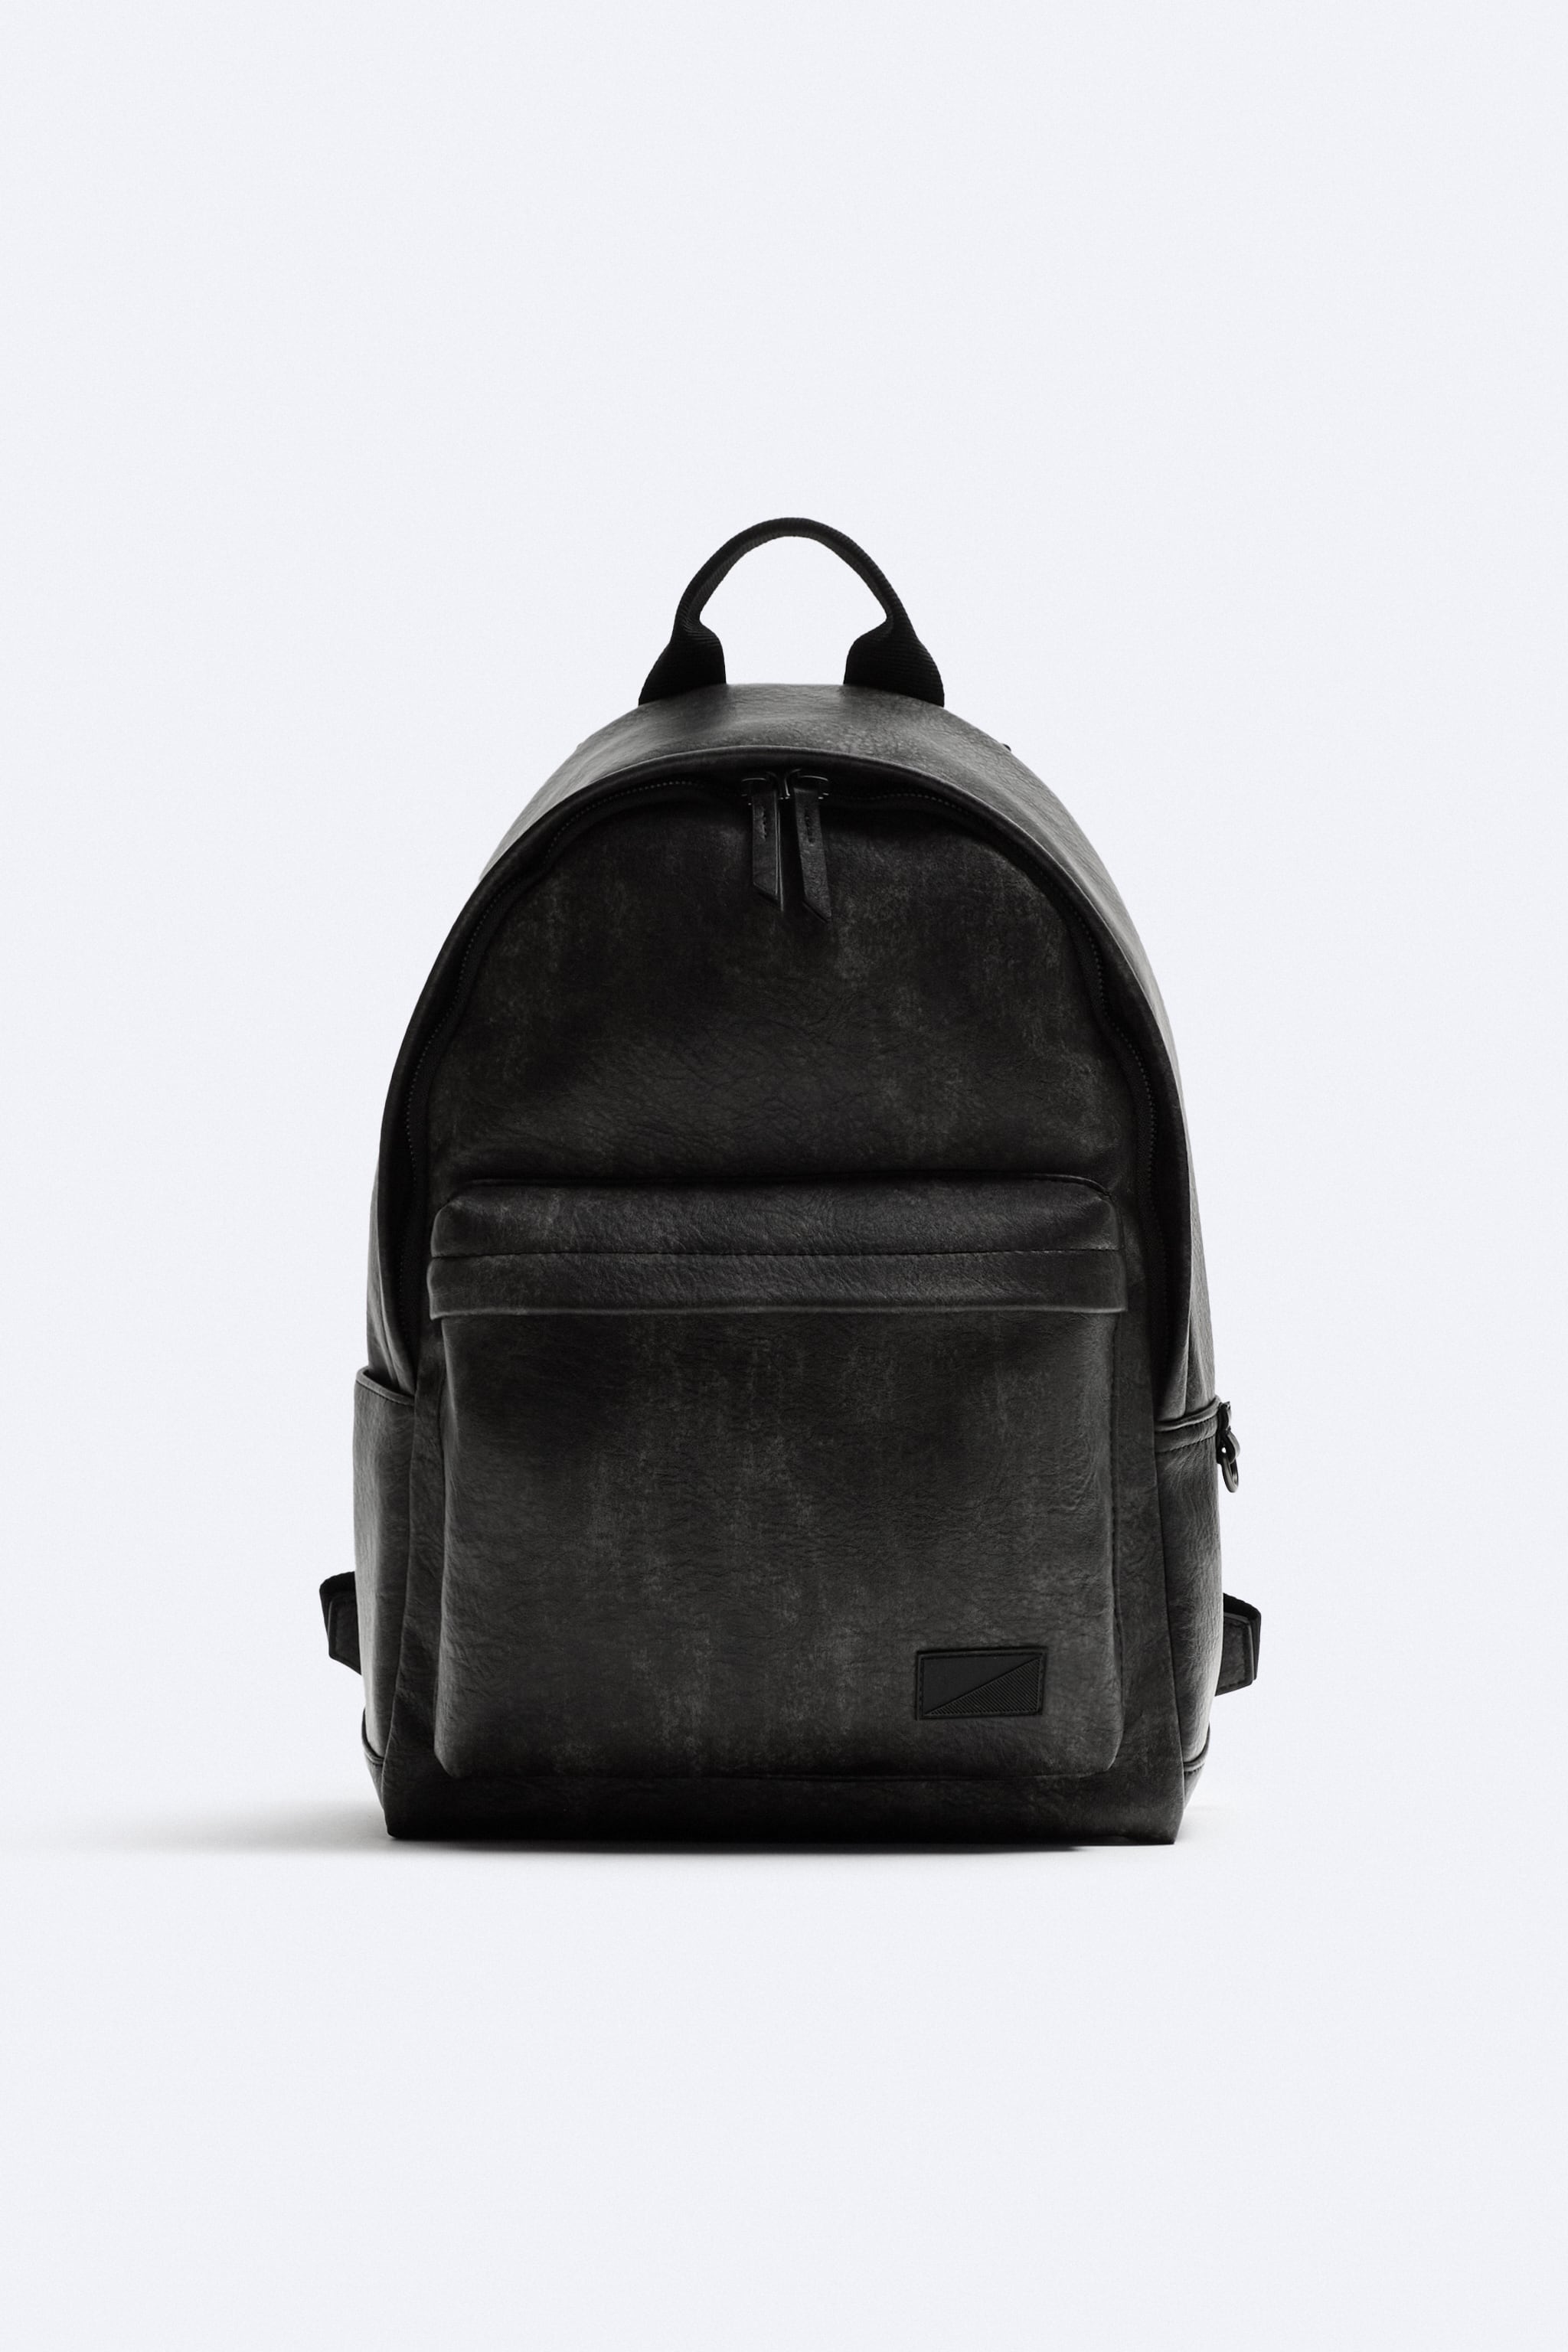 TUMBLED DISTRESSED LEATHER BACKPACK